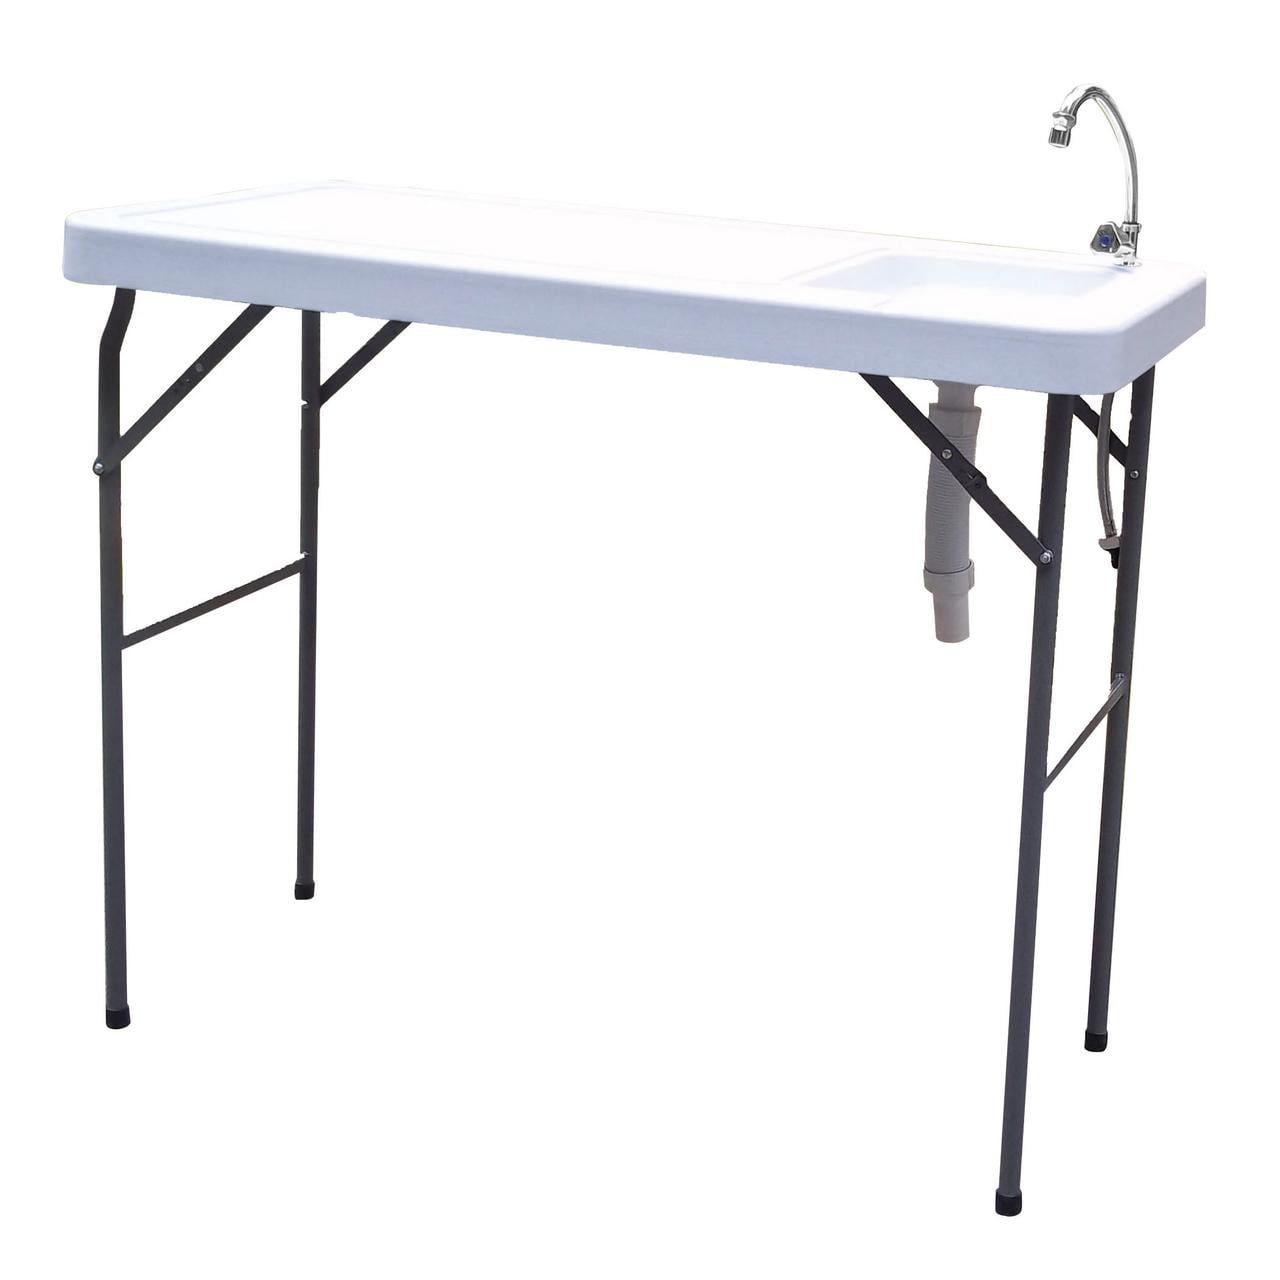 Docooler Outdoor Fish and Cutting Cleaning Table wSink and